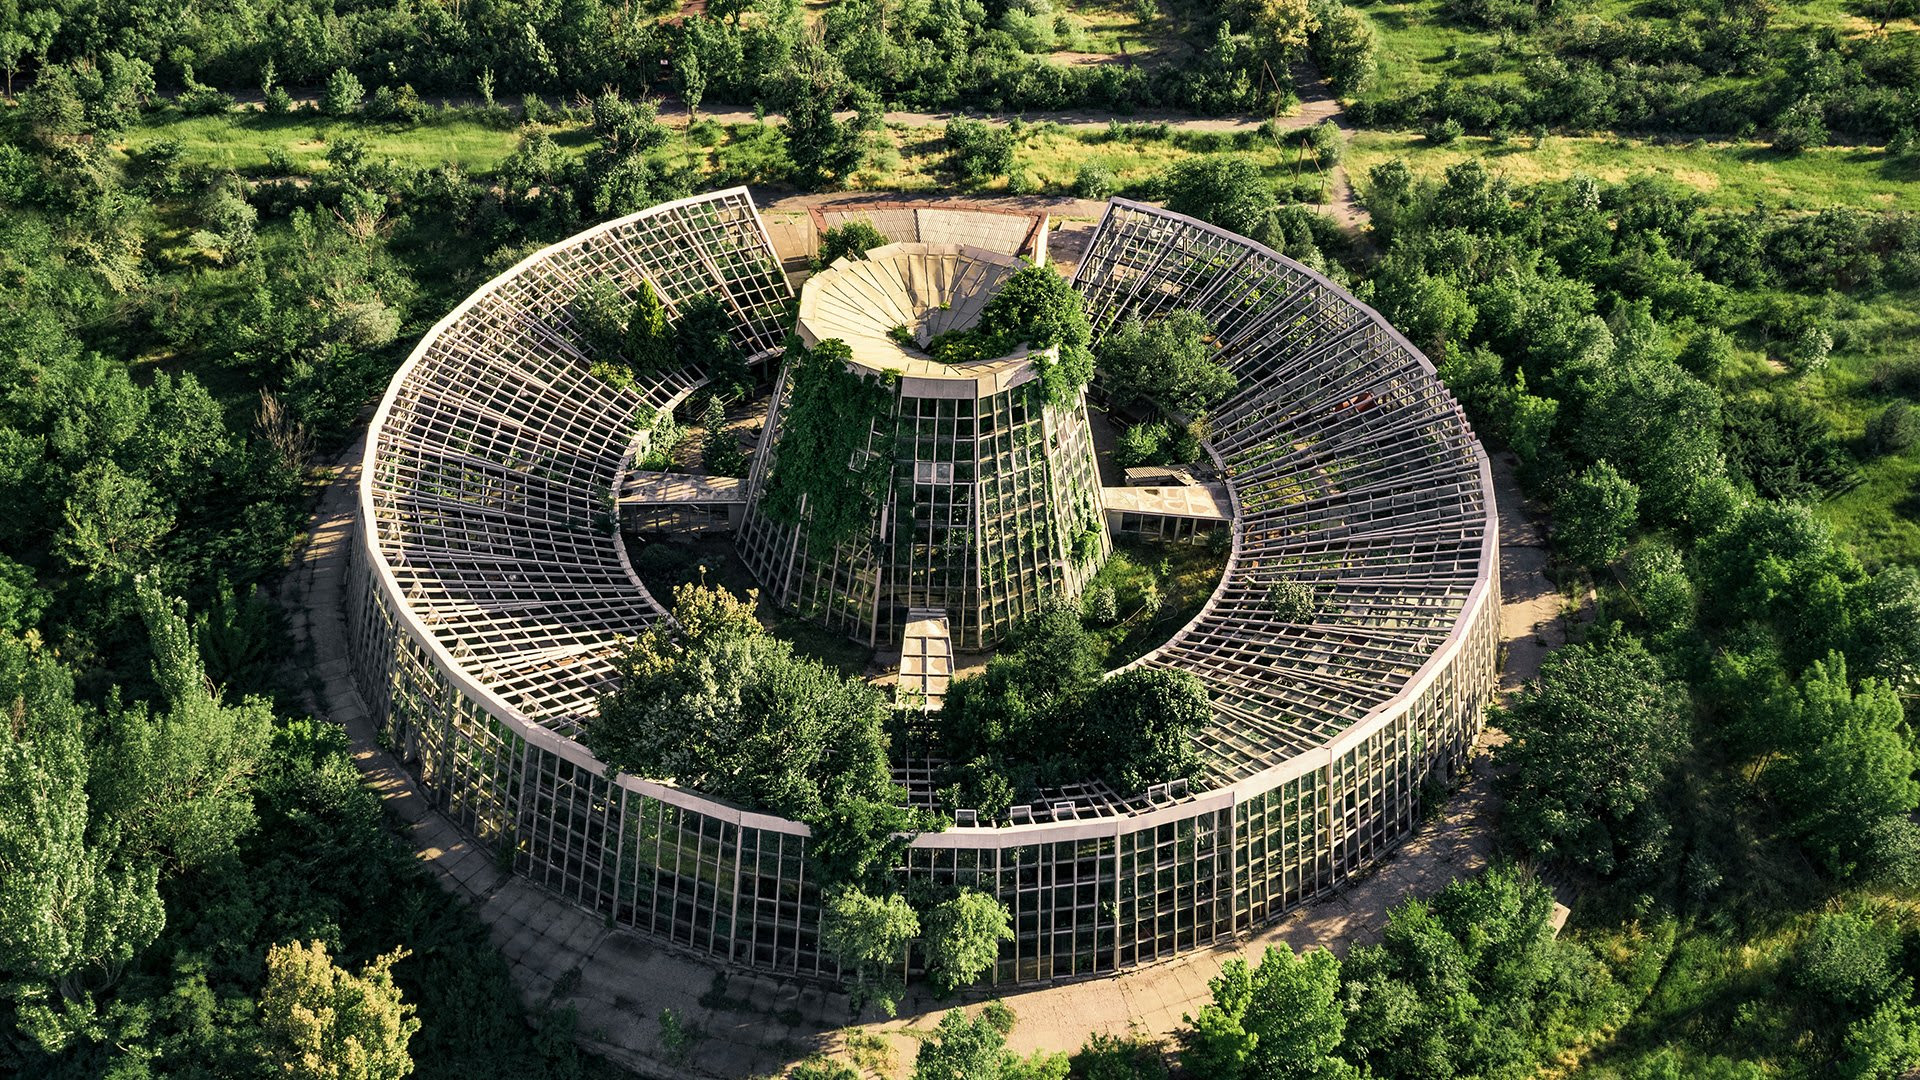 Image of an aerial view of the Yerevan Botanical Gardens. Surrounding the building is a forest of trees. The building itself is circular with a center tower. All sides show vegetation growing out of it as a sanctuary for rare plants.